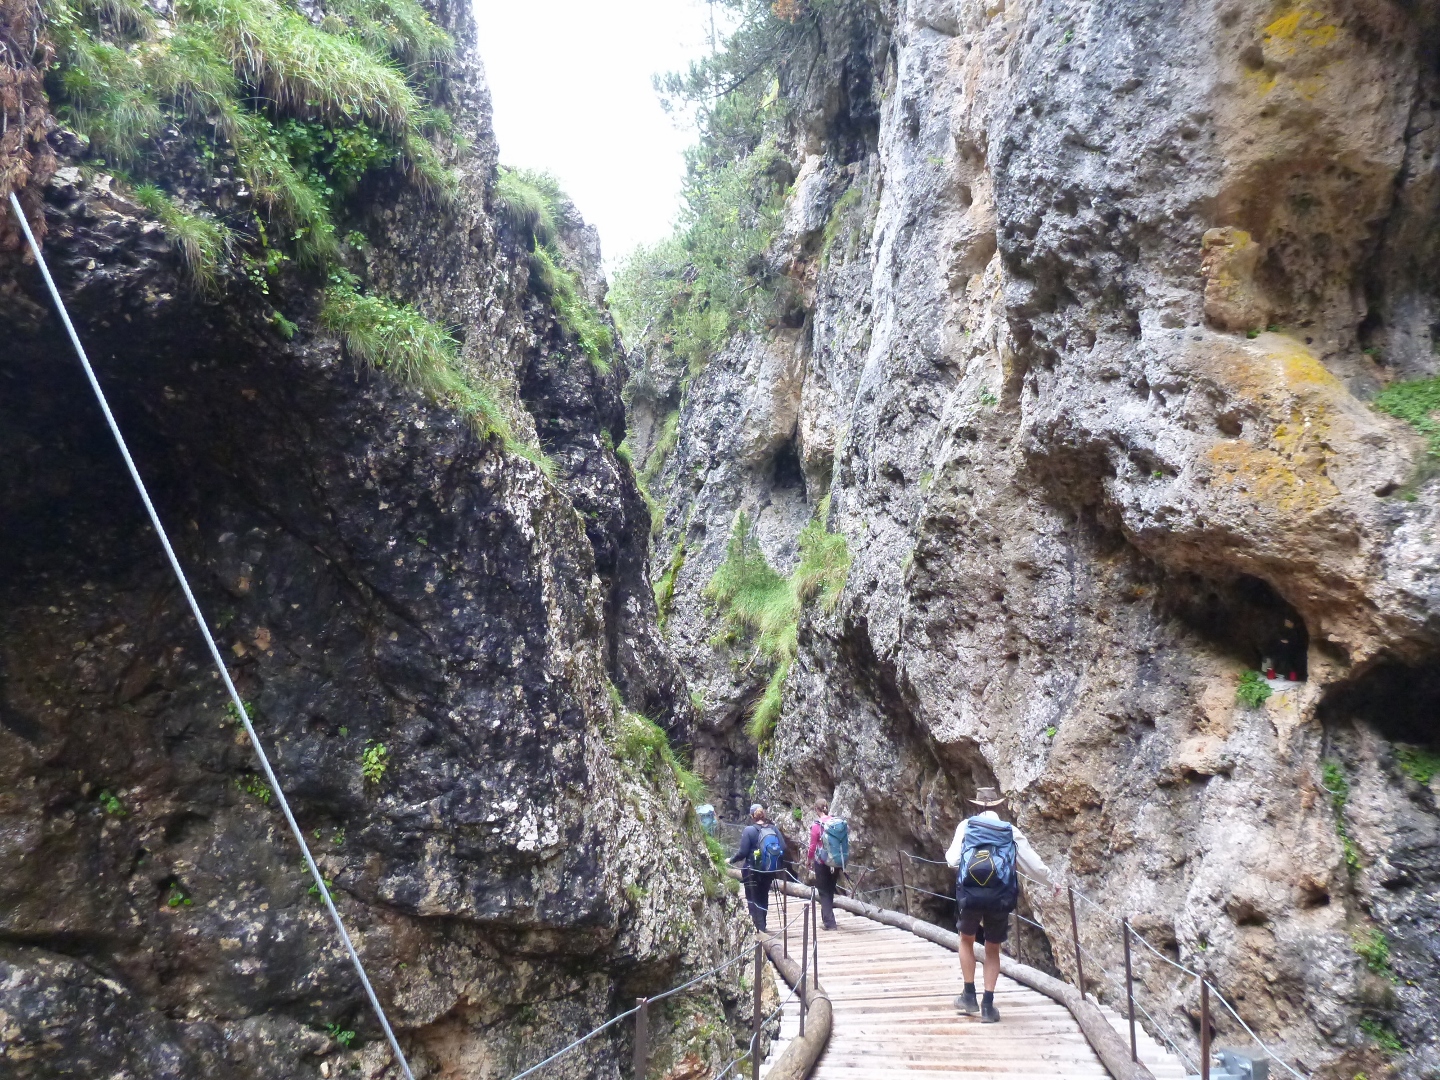 trail above canyon stream trekking in dolomites italy aug 2014